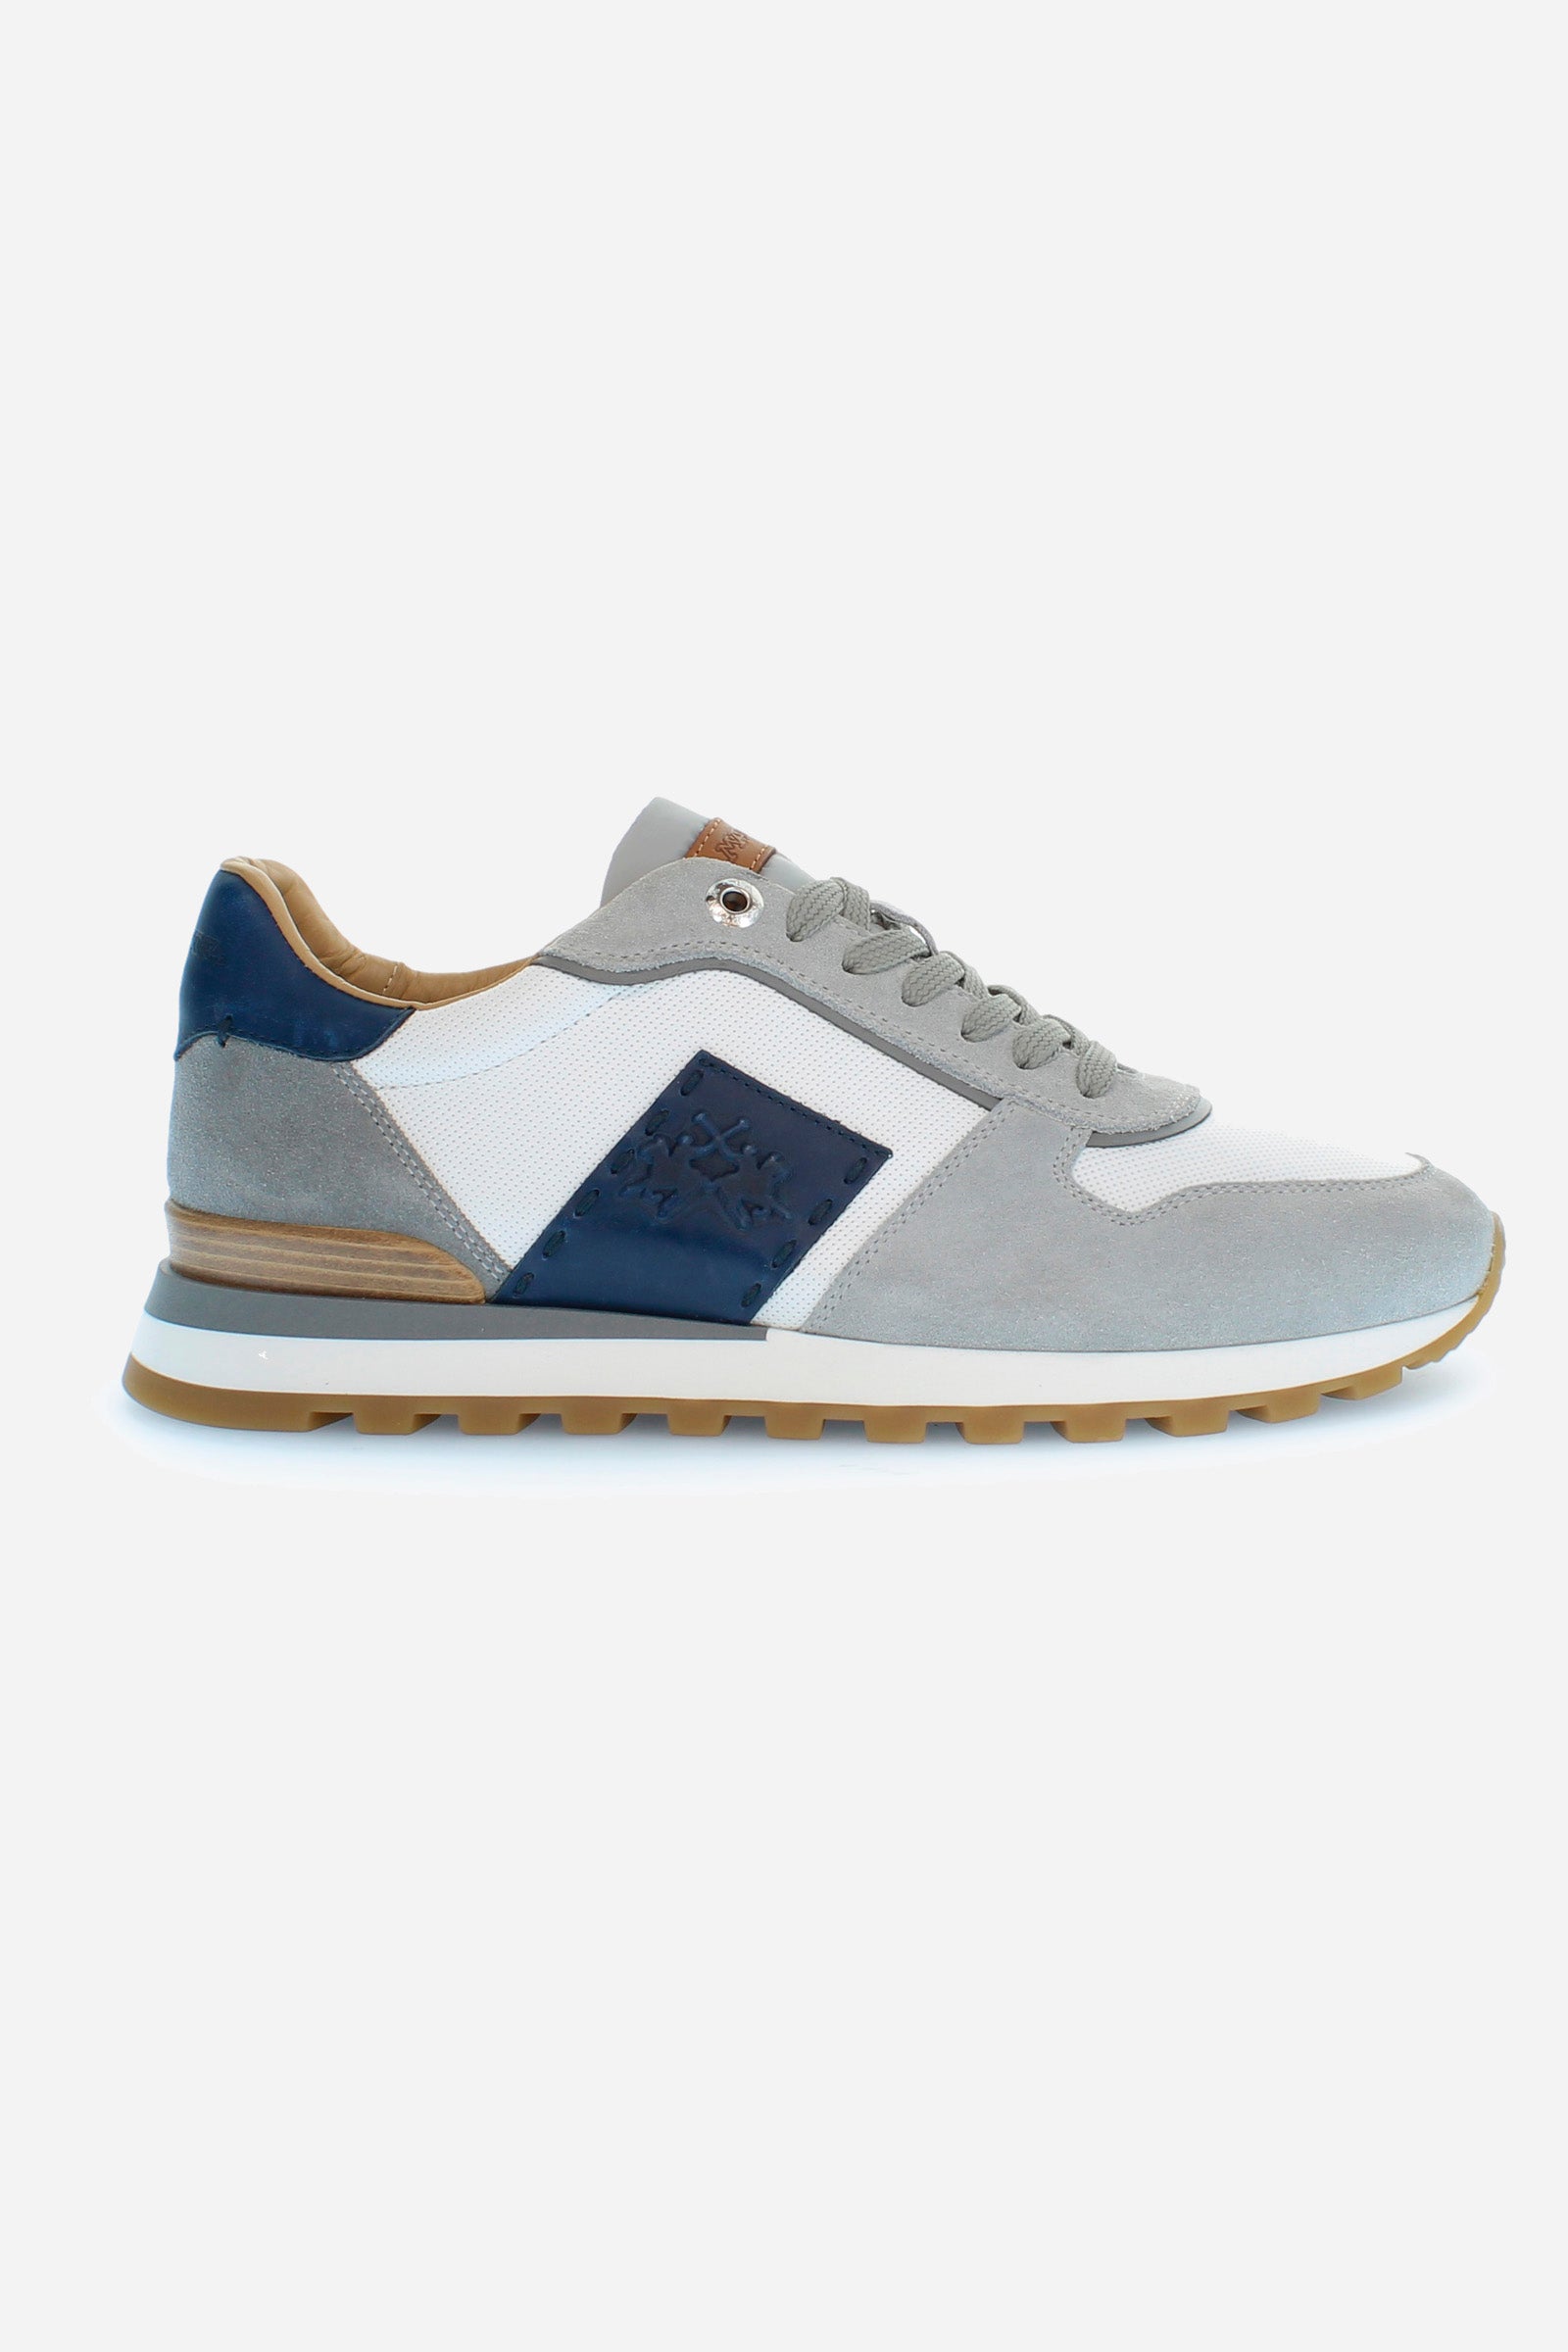 Men's trainers in multi-colour canvas and suede